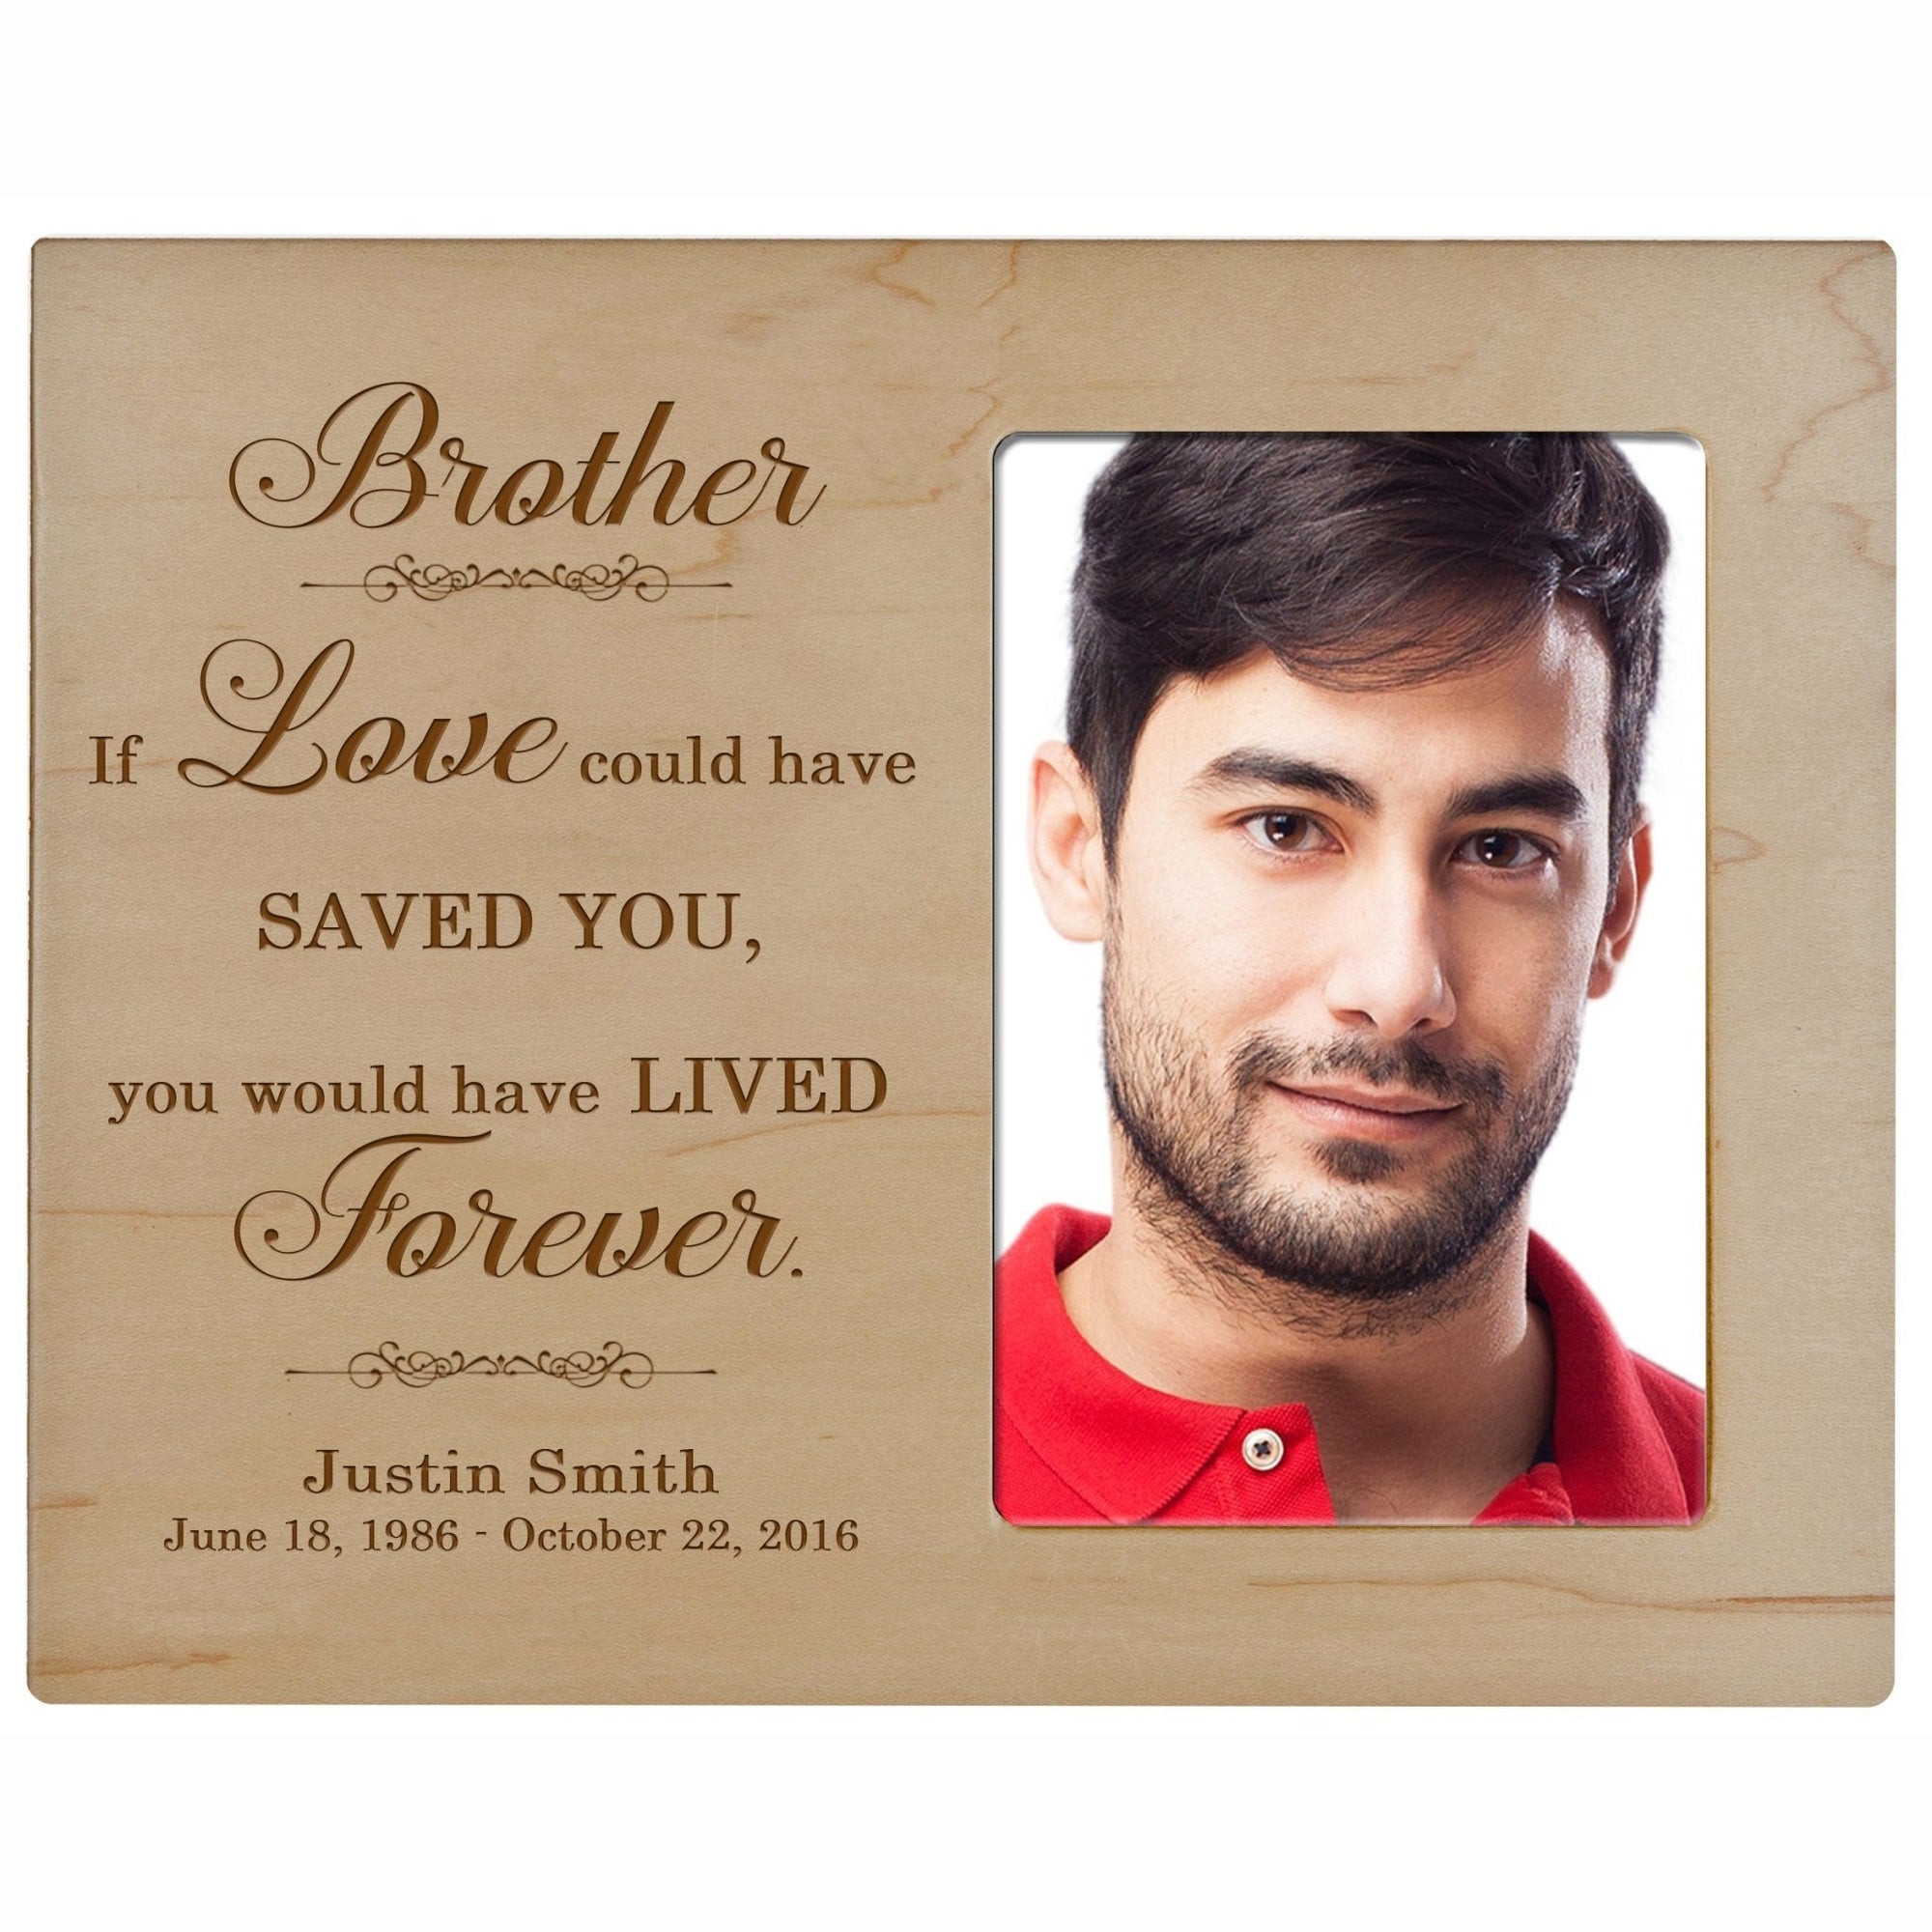 Personalized Horizontal 8x10 Wooden Memorial Picture Frame Holds 4x6 Photo - Brother, If Love Could - LifeSong Milestones